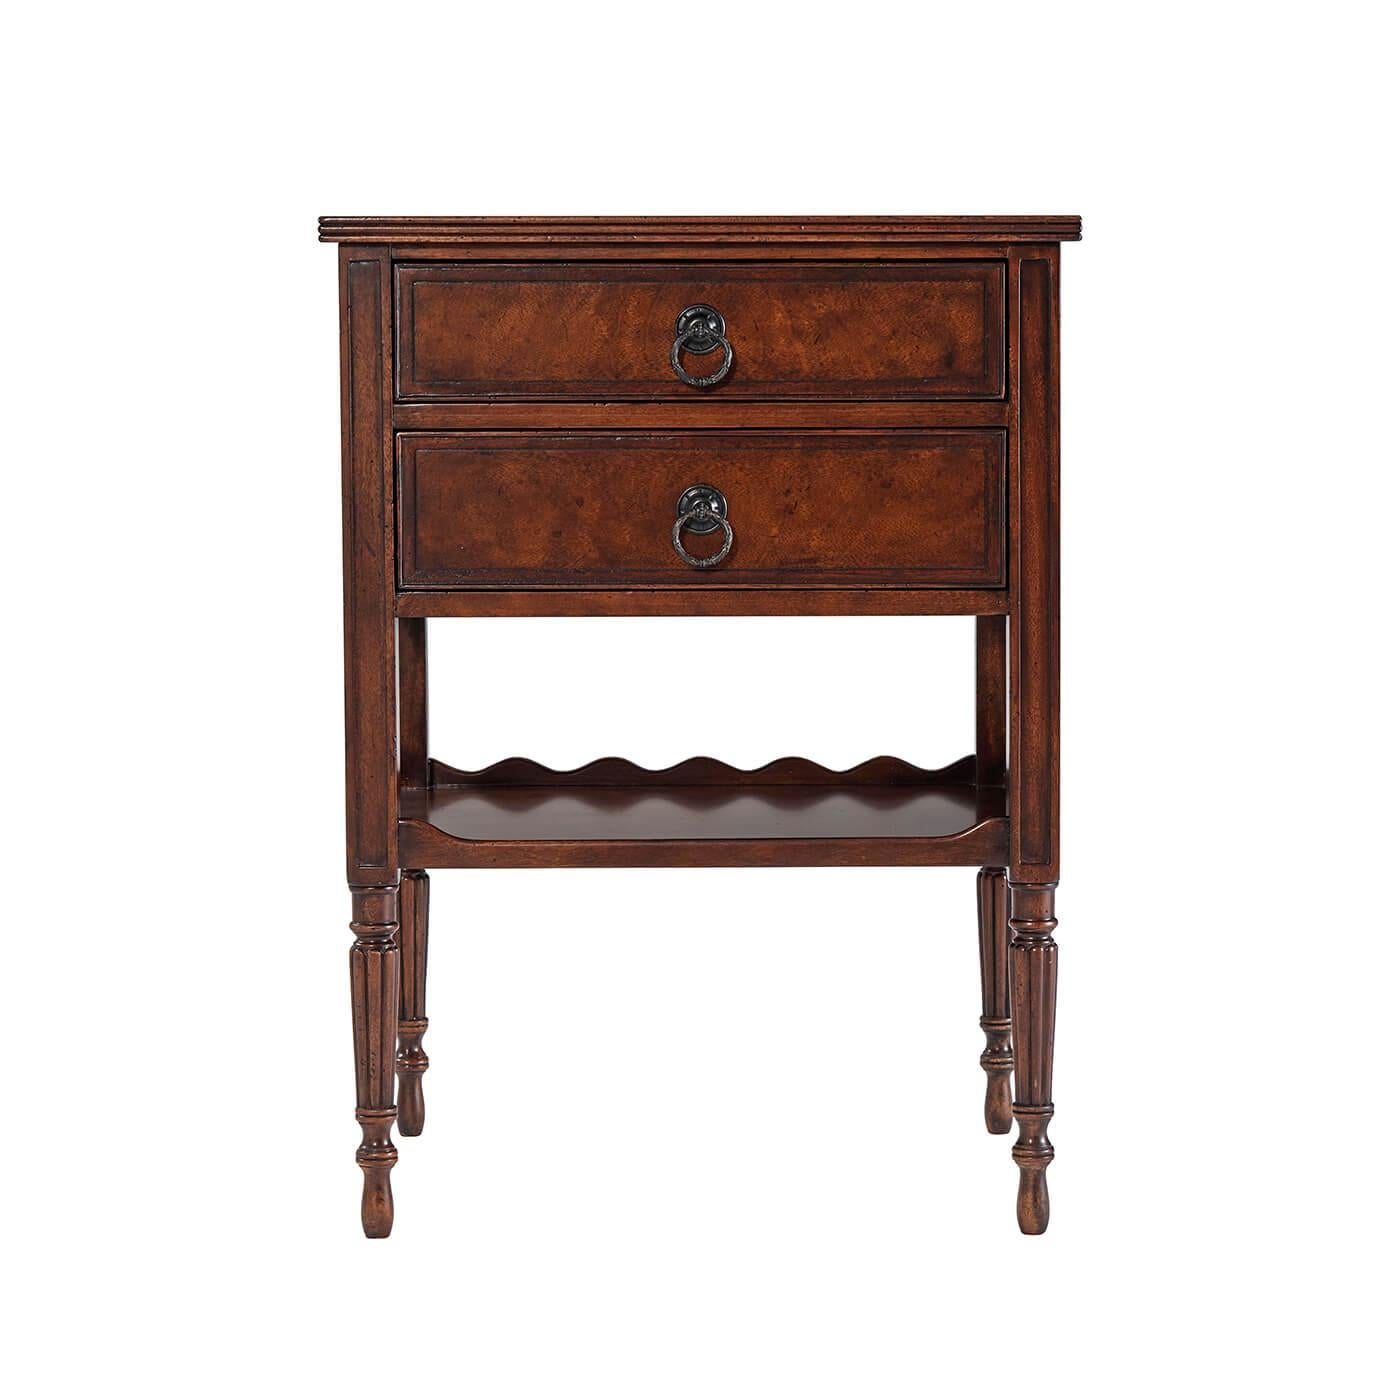 A French Louis XVI Provincial nightstand, the rectangular crossbanded and reeded edge top above two graduated drawers and a serpentine three-quarter galleried under tier, on turned and reeded tapering legs with skittle feet. 

Dimensions: 22